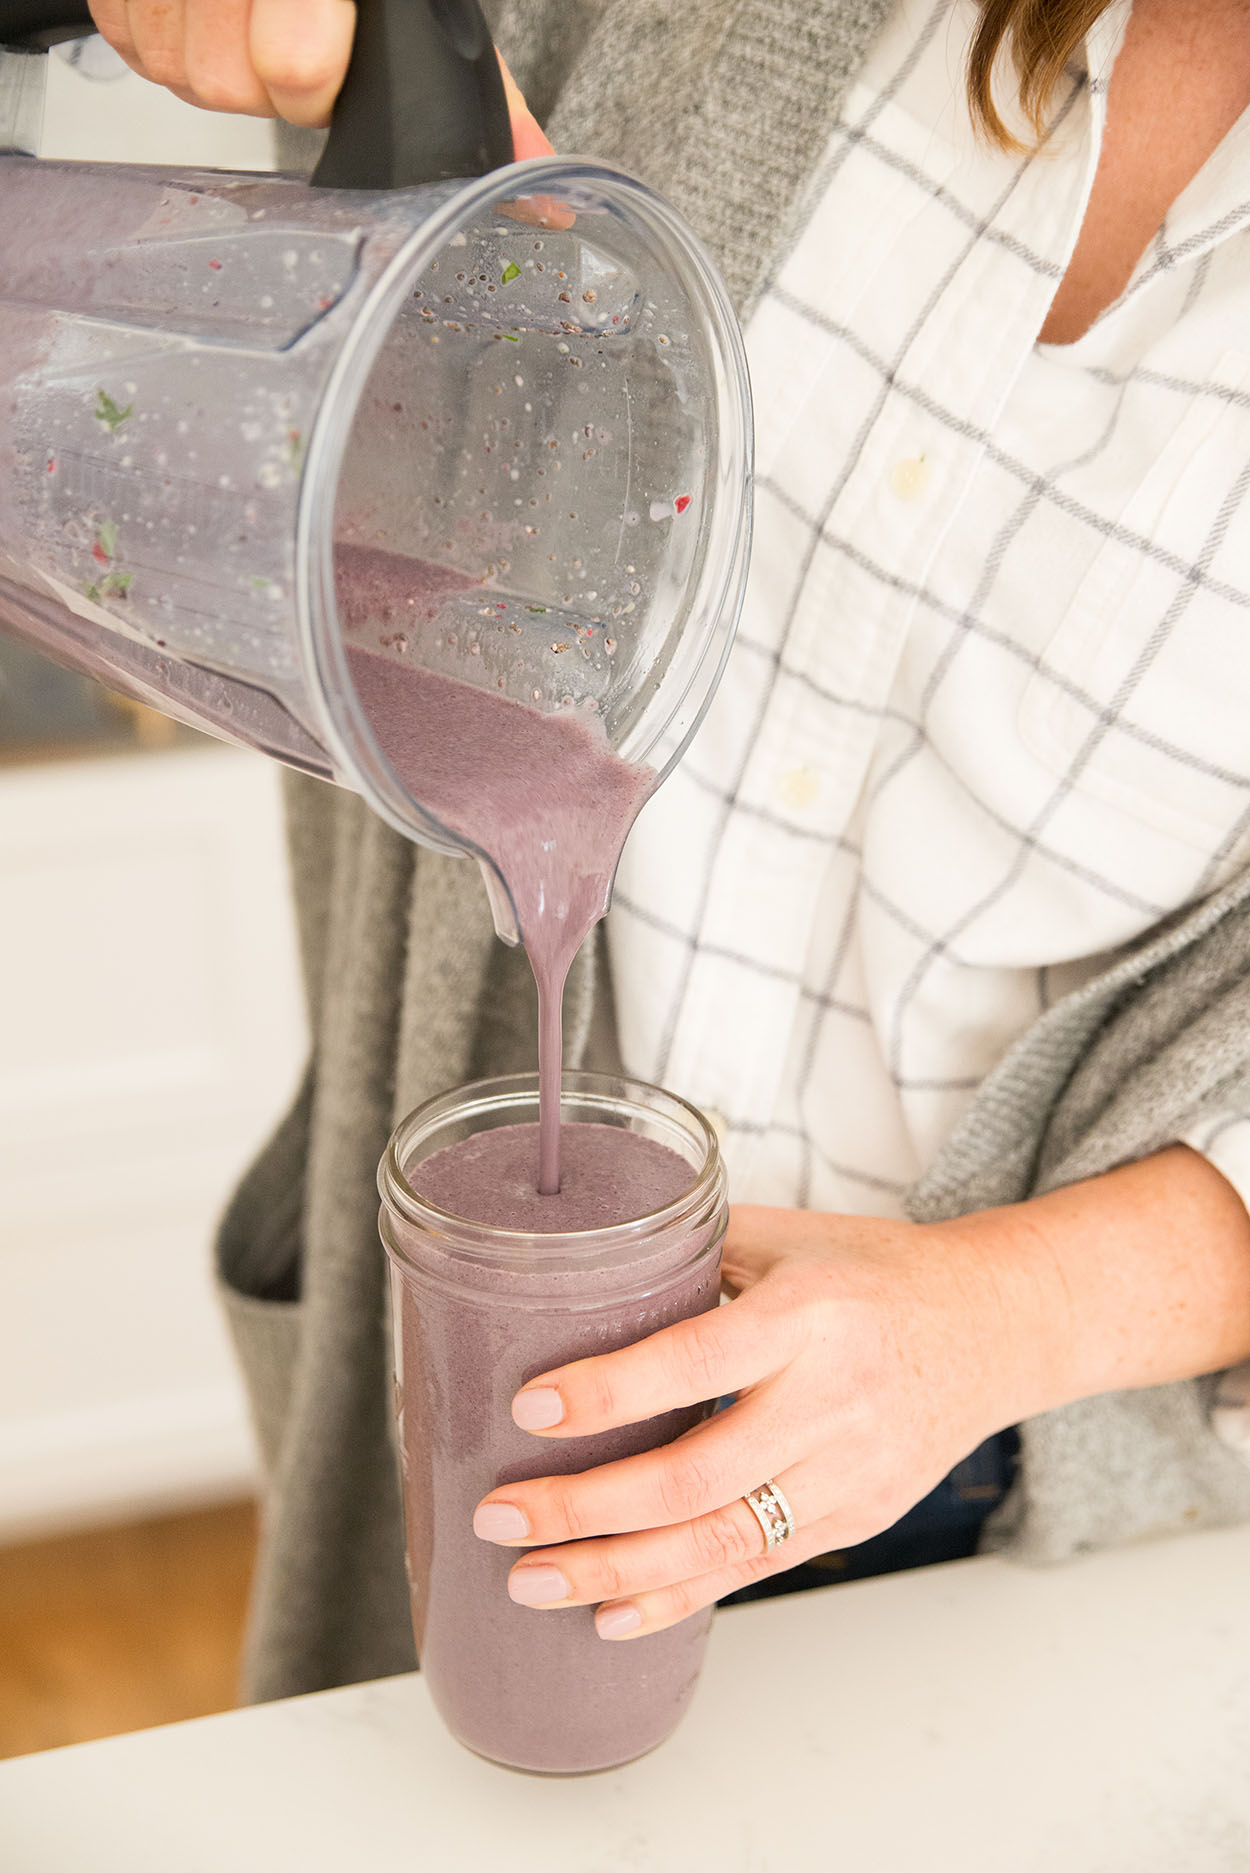 andrea pouring a purple smoothie into a glass